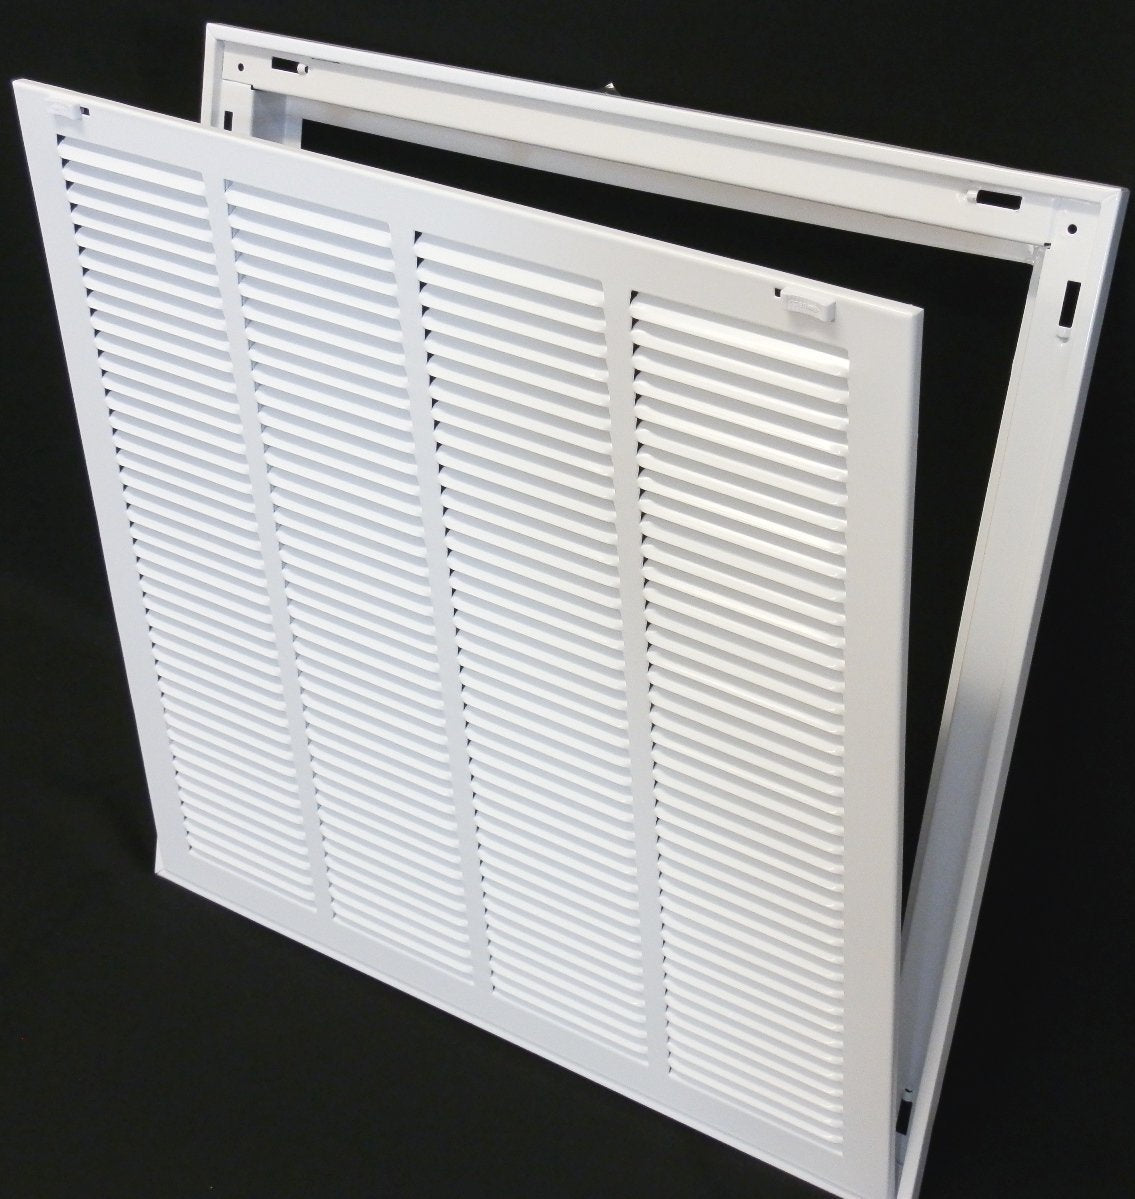 26&quot; X 30&quot; Steel Return Air Filter Grille for 1&quot; Filter - Removable Frame - [Outer Dimensions: 28 5/8&quot; X 32 5/8&quot;]